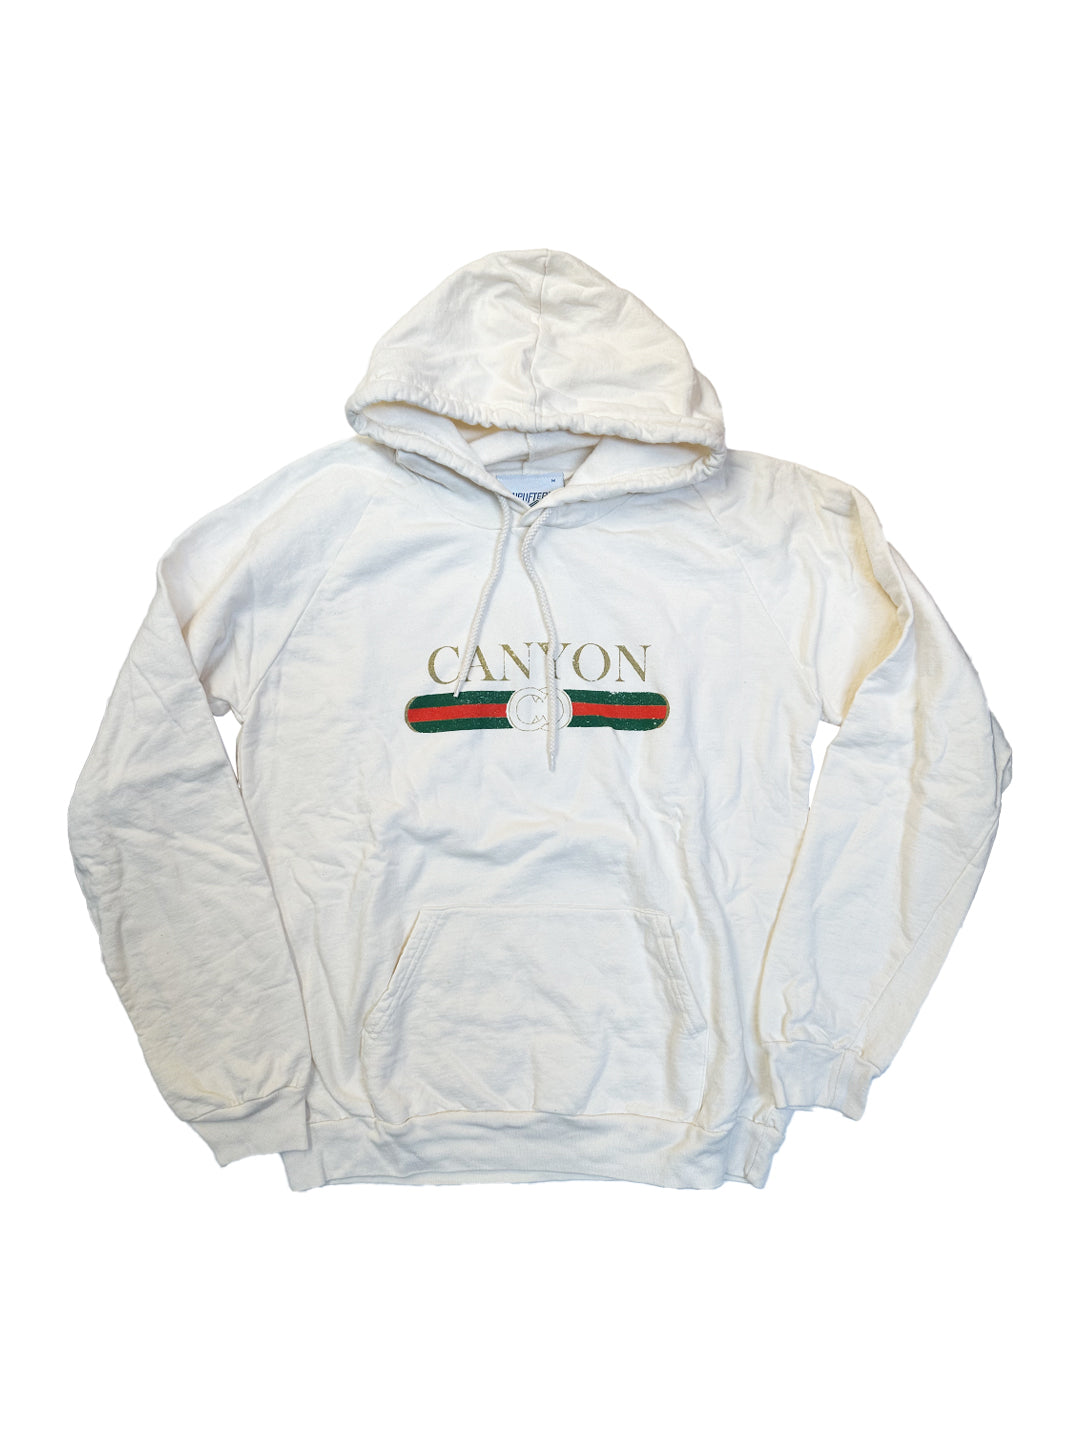 Canyon Adult Stripe Pullover Hoodie in Ivory